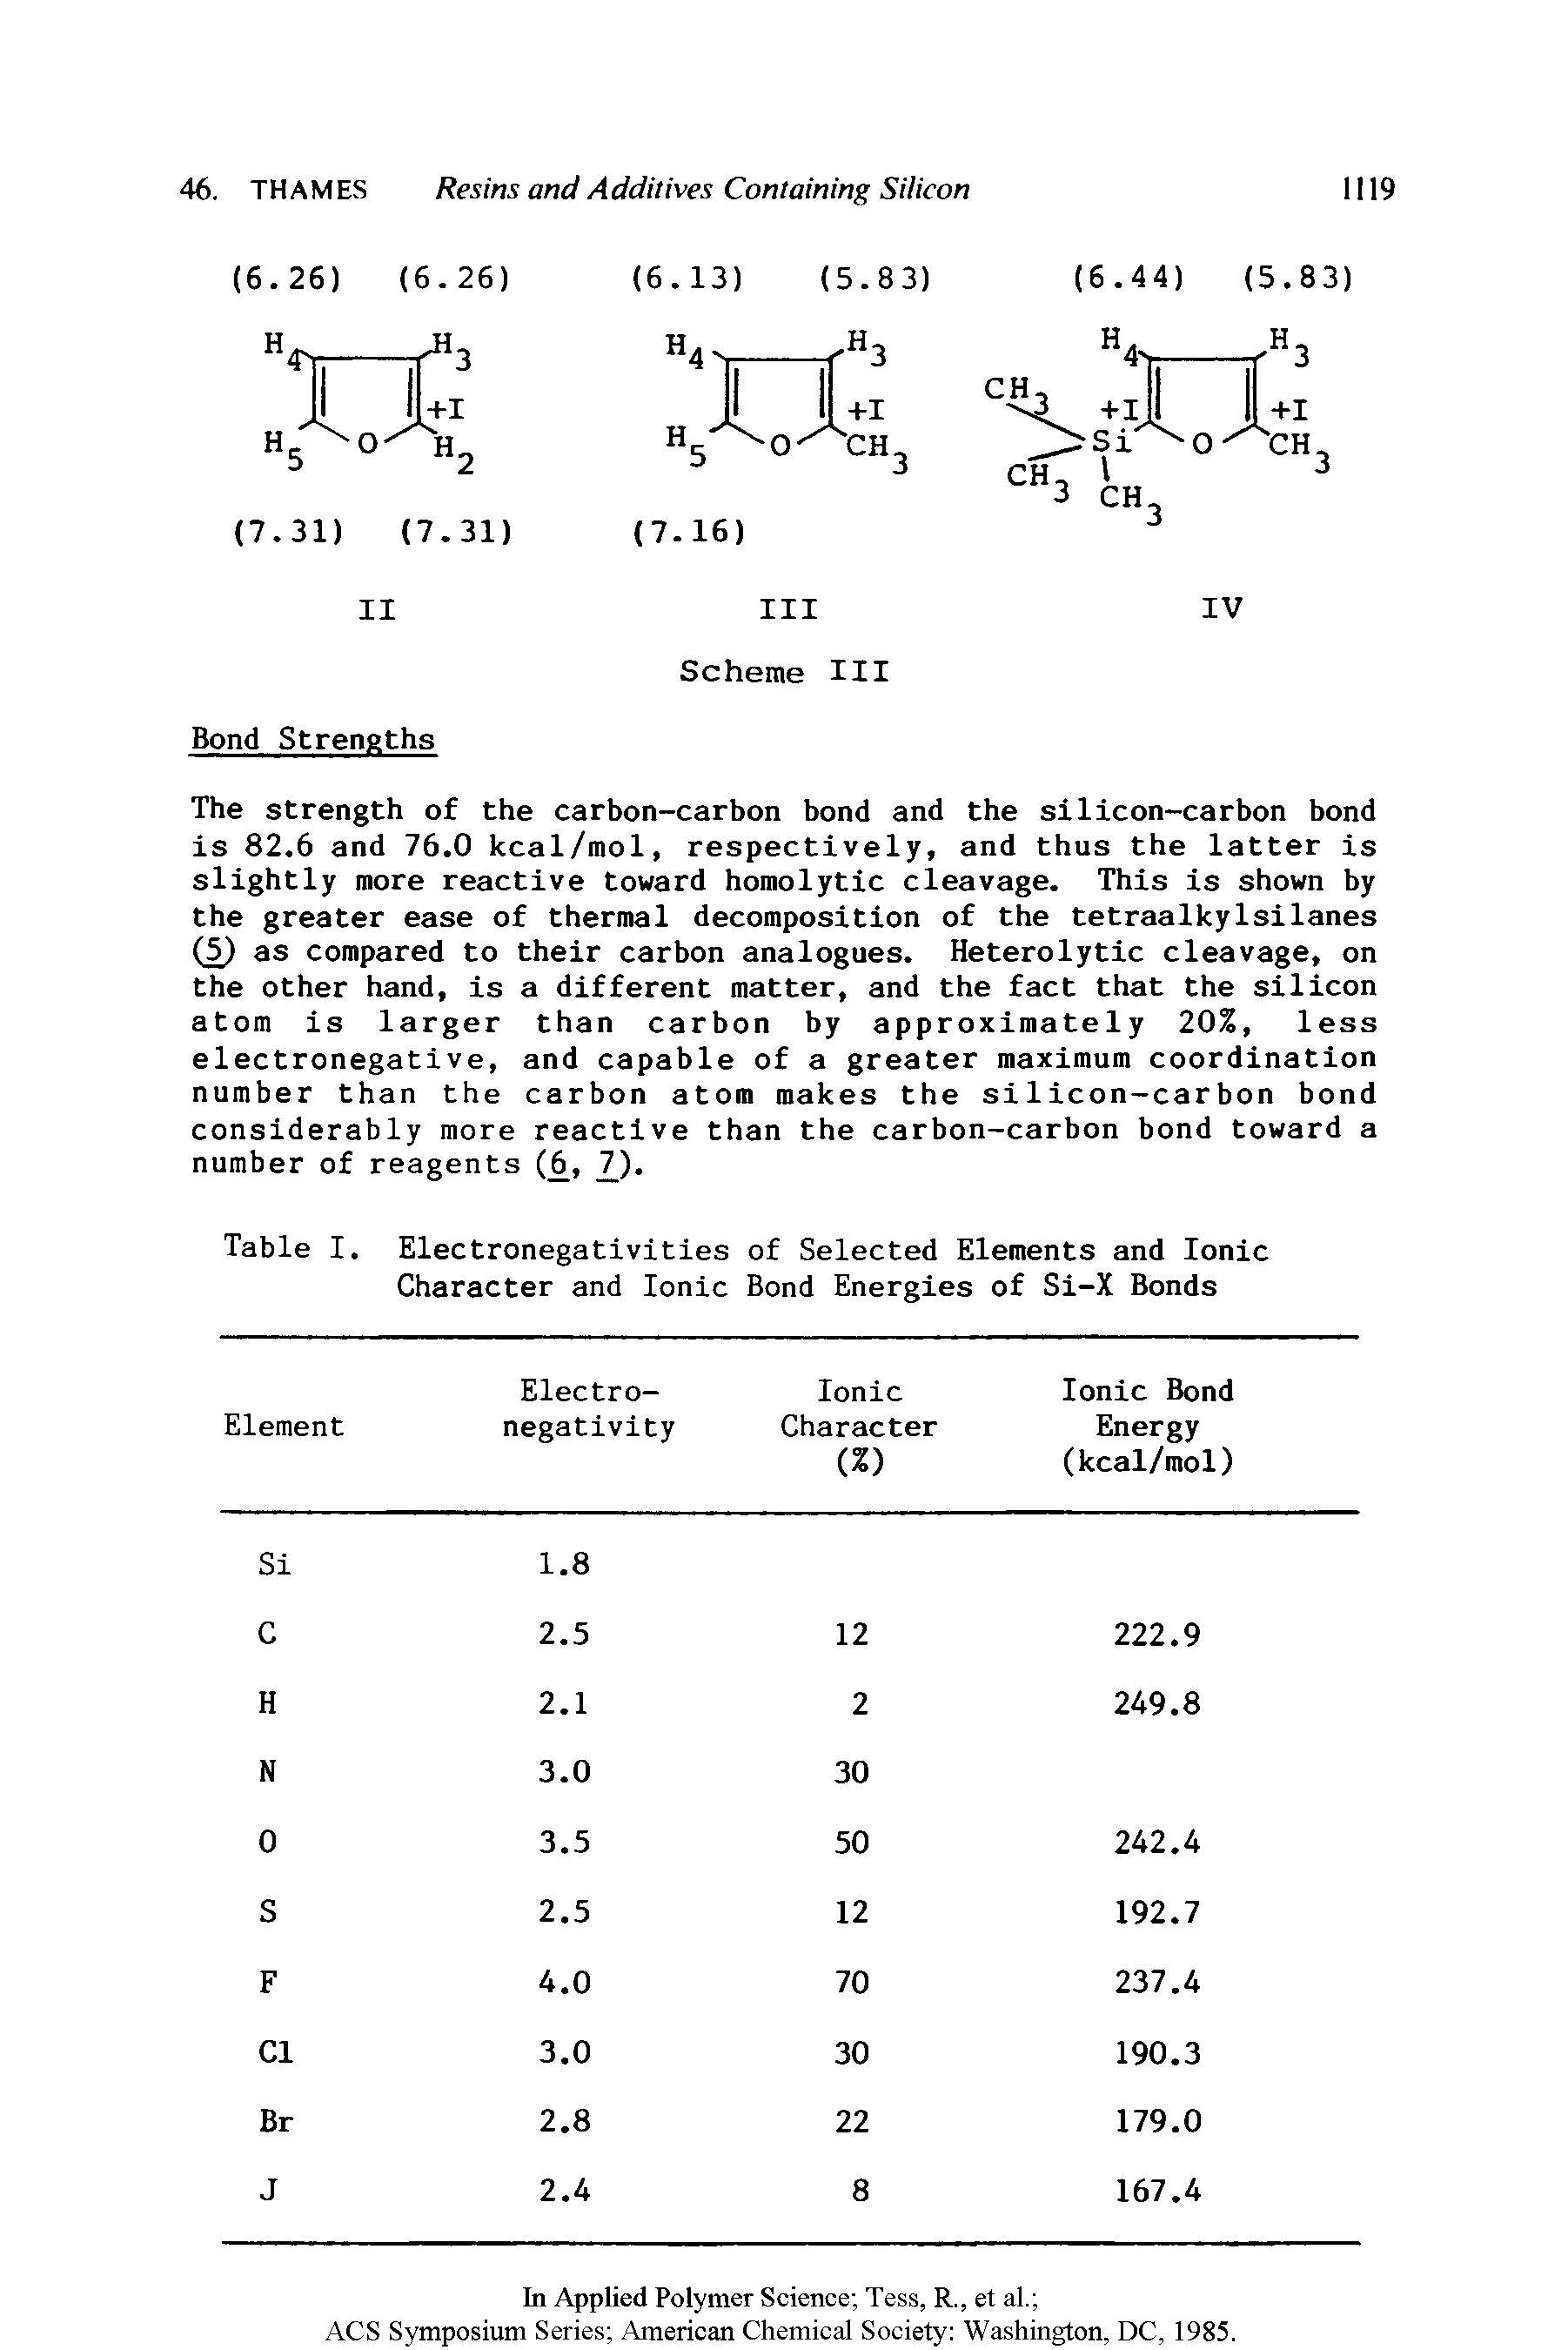 Table I. Electronegativities of Selected Elements and Ionic Character and Ionic Bond Energies of Si-X Bonds...